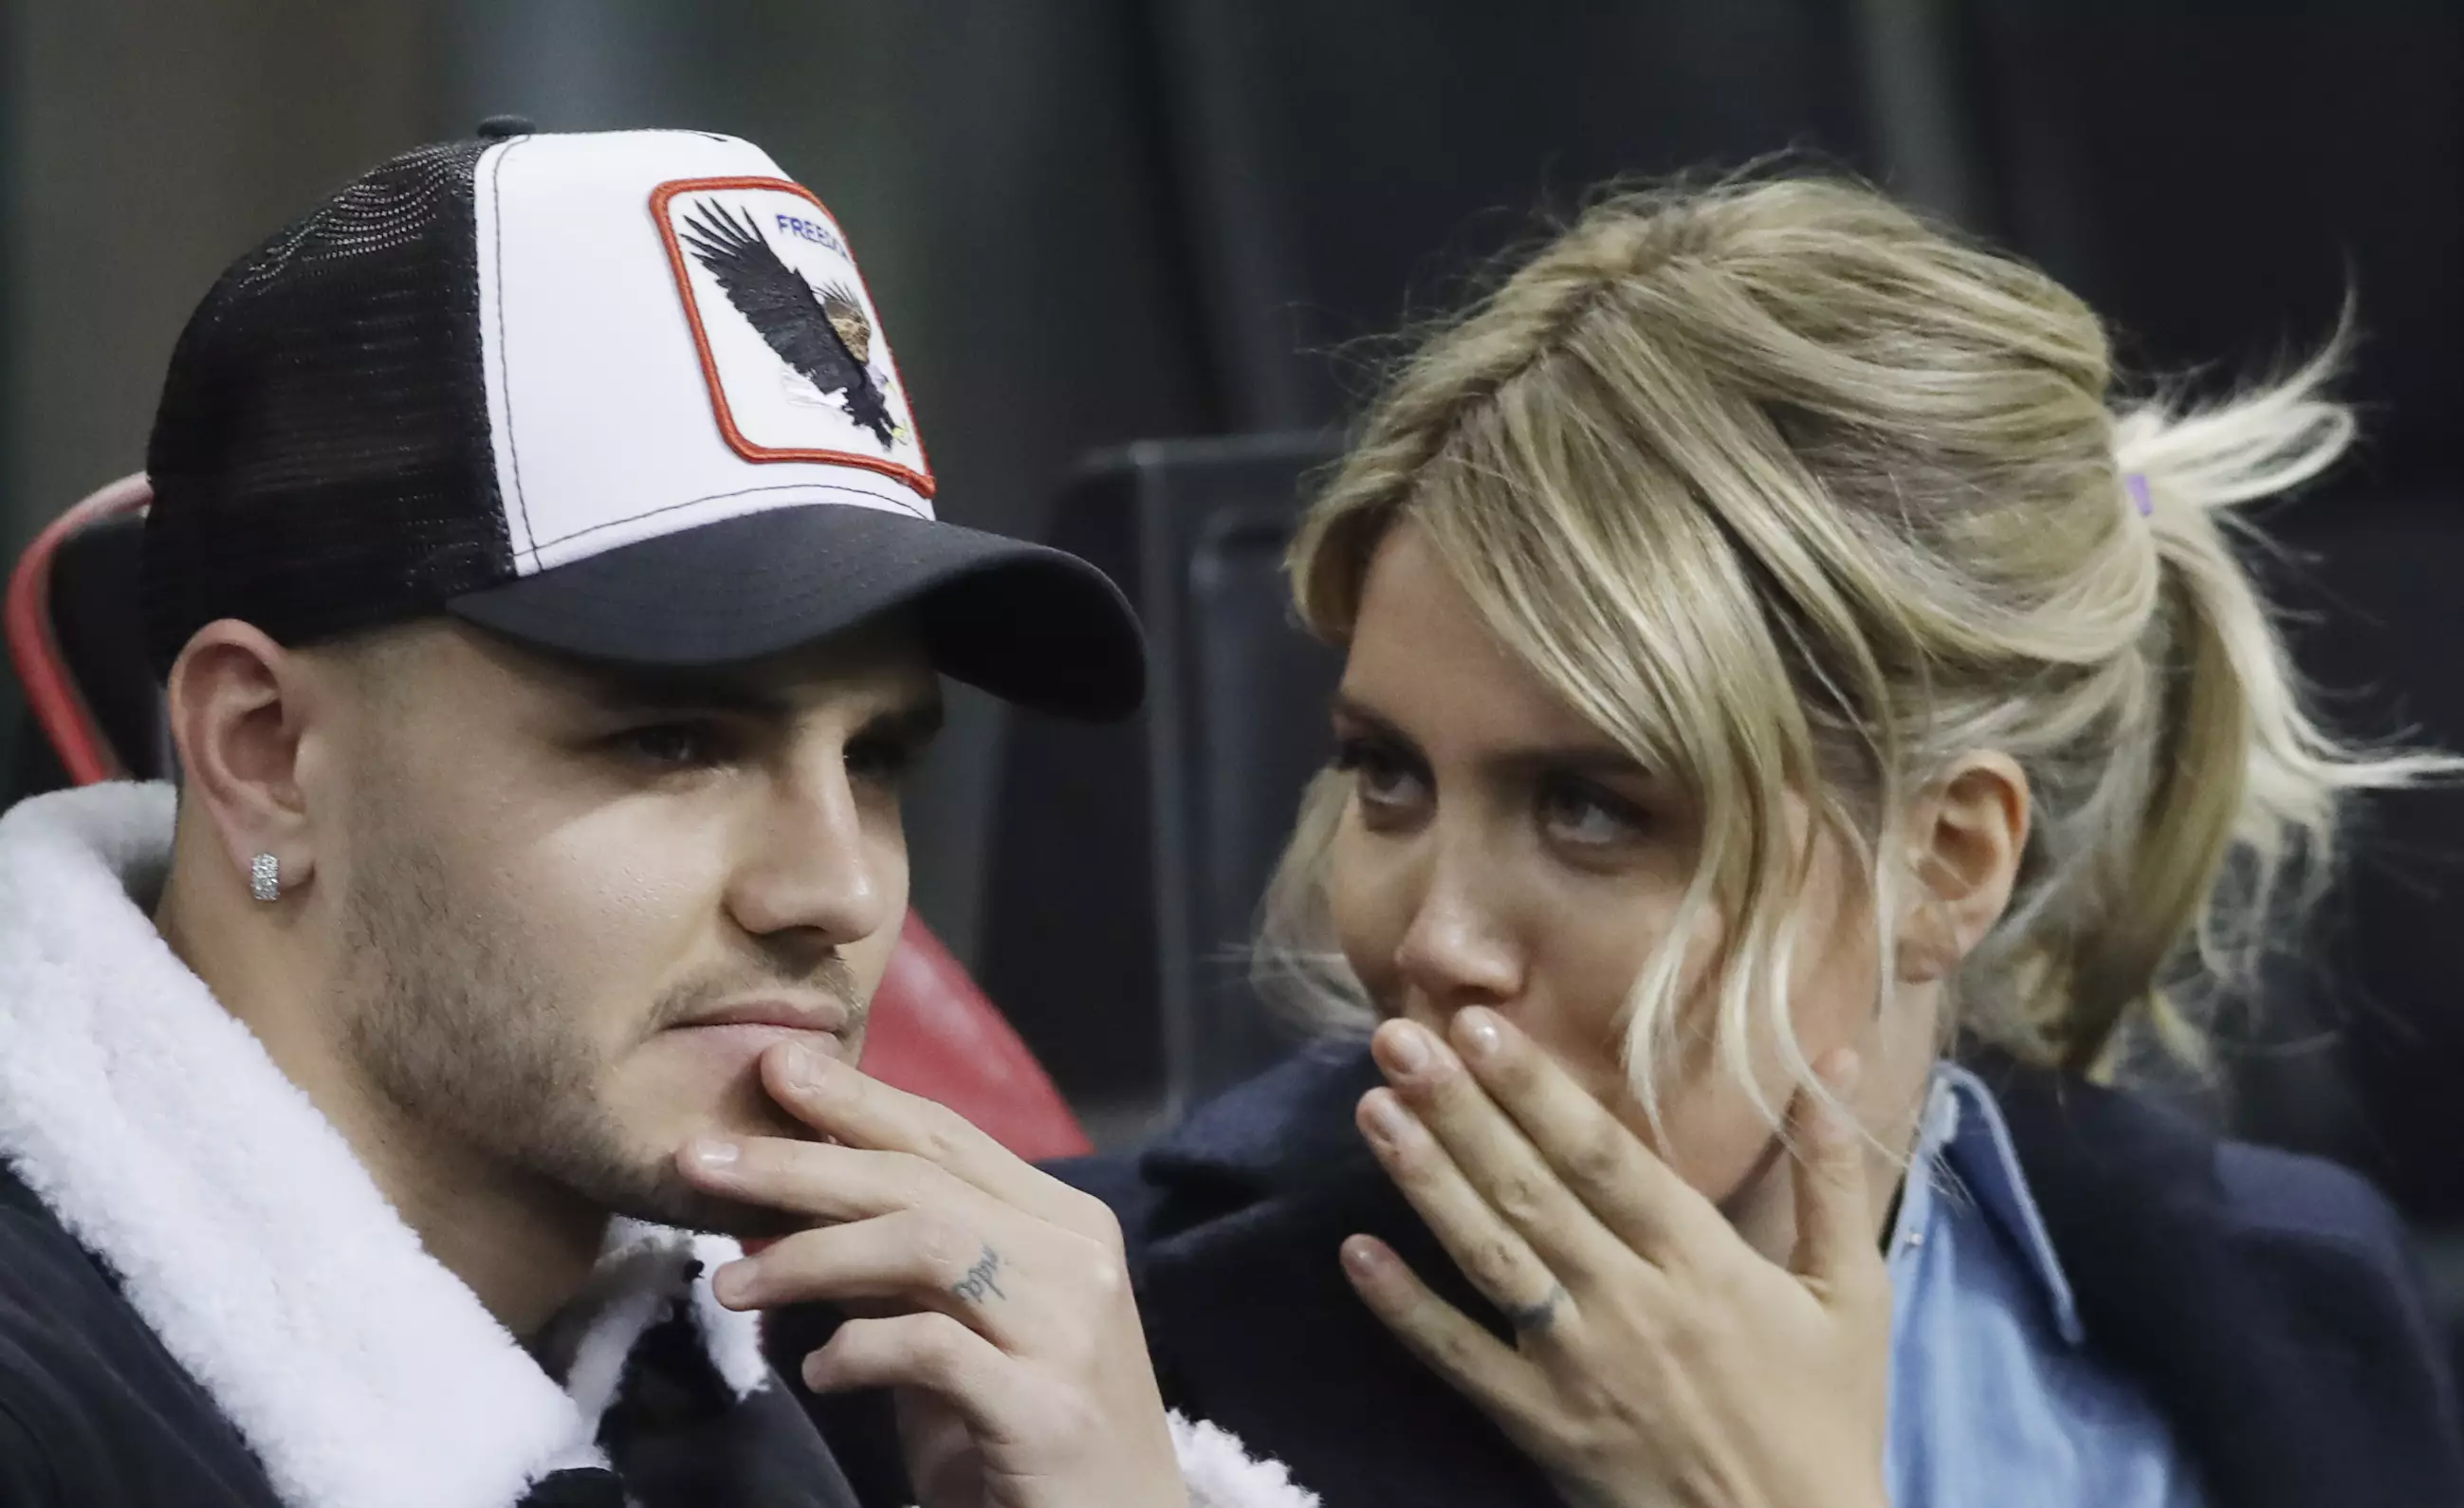 Wanda and Icardi talk to each other in the stand at a recent Inter game. Image: PA Images